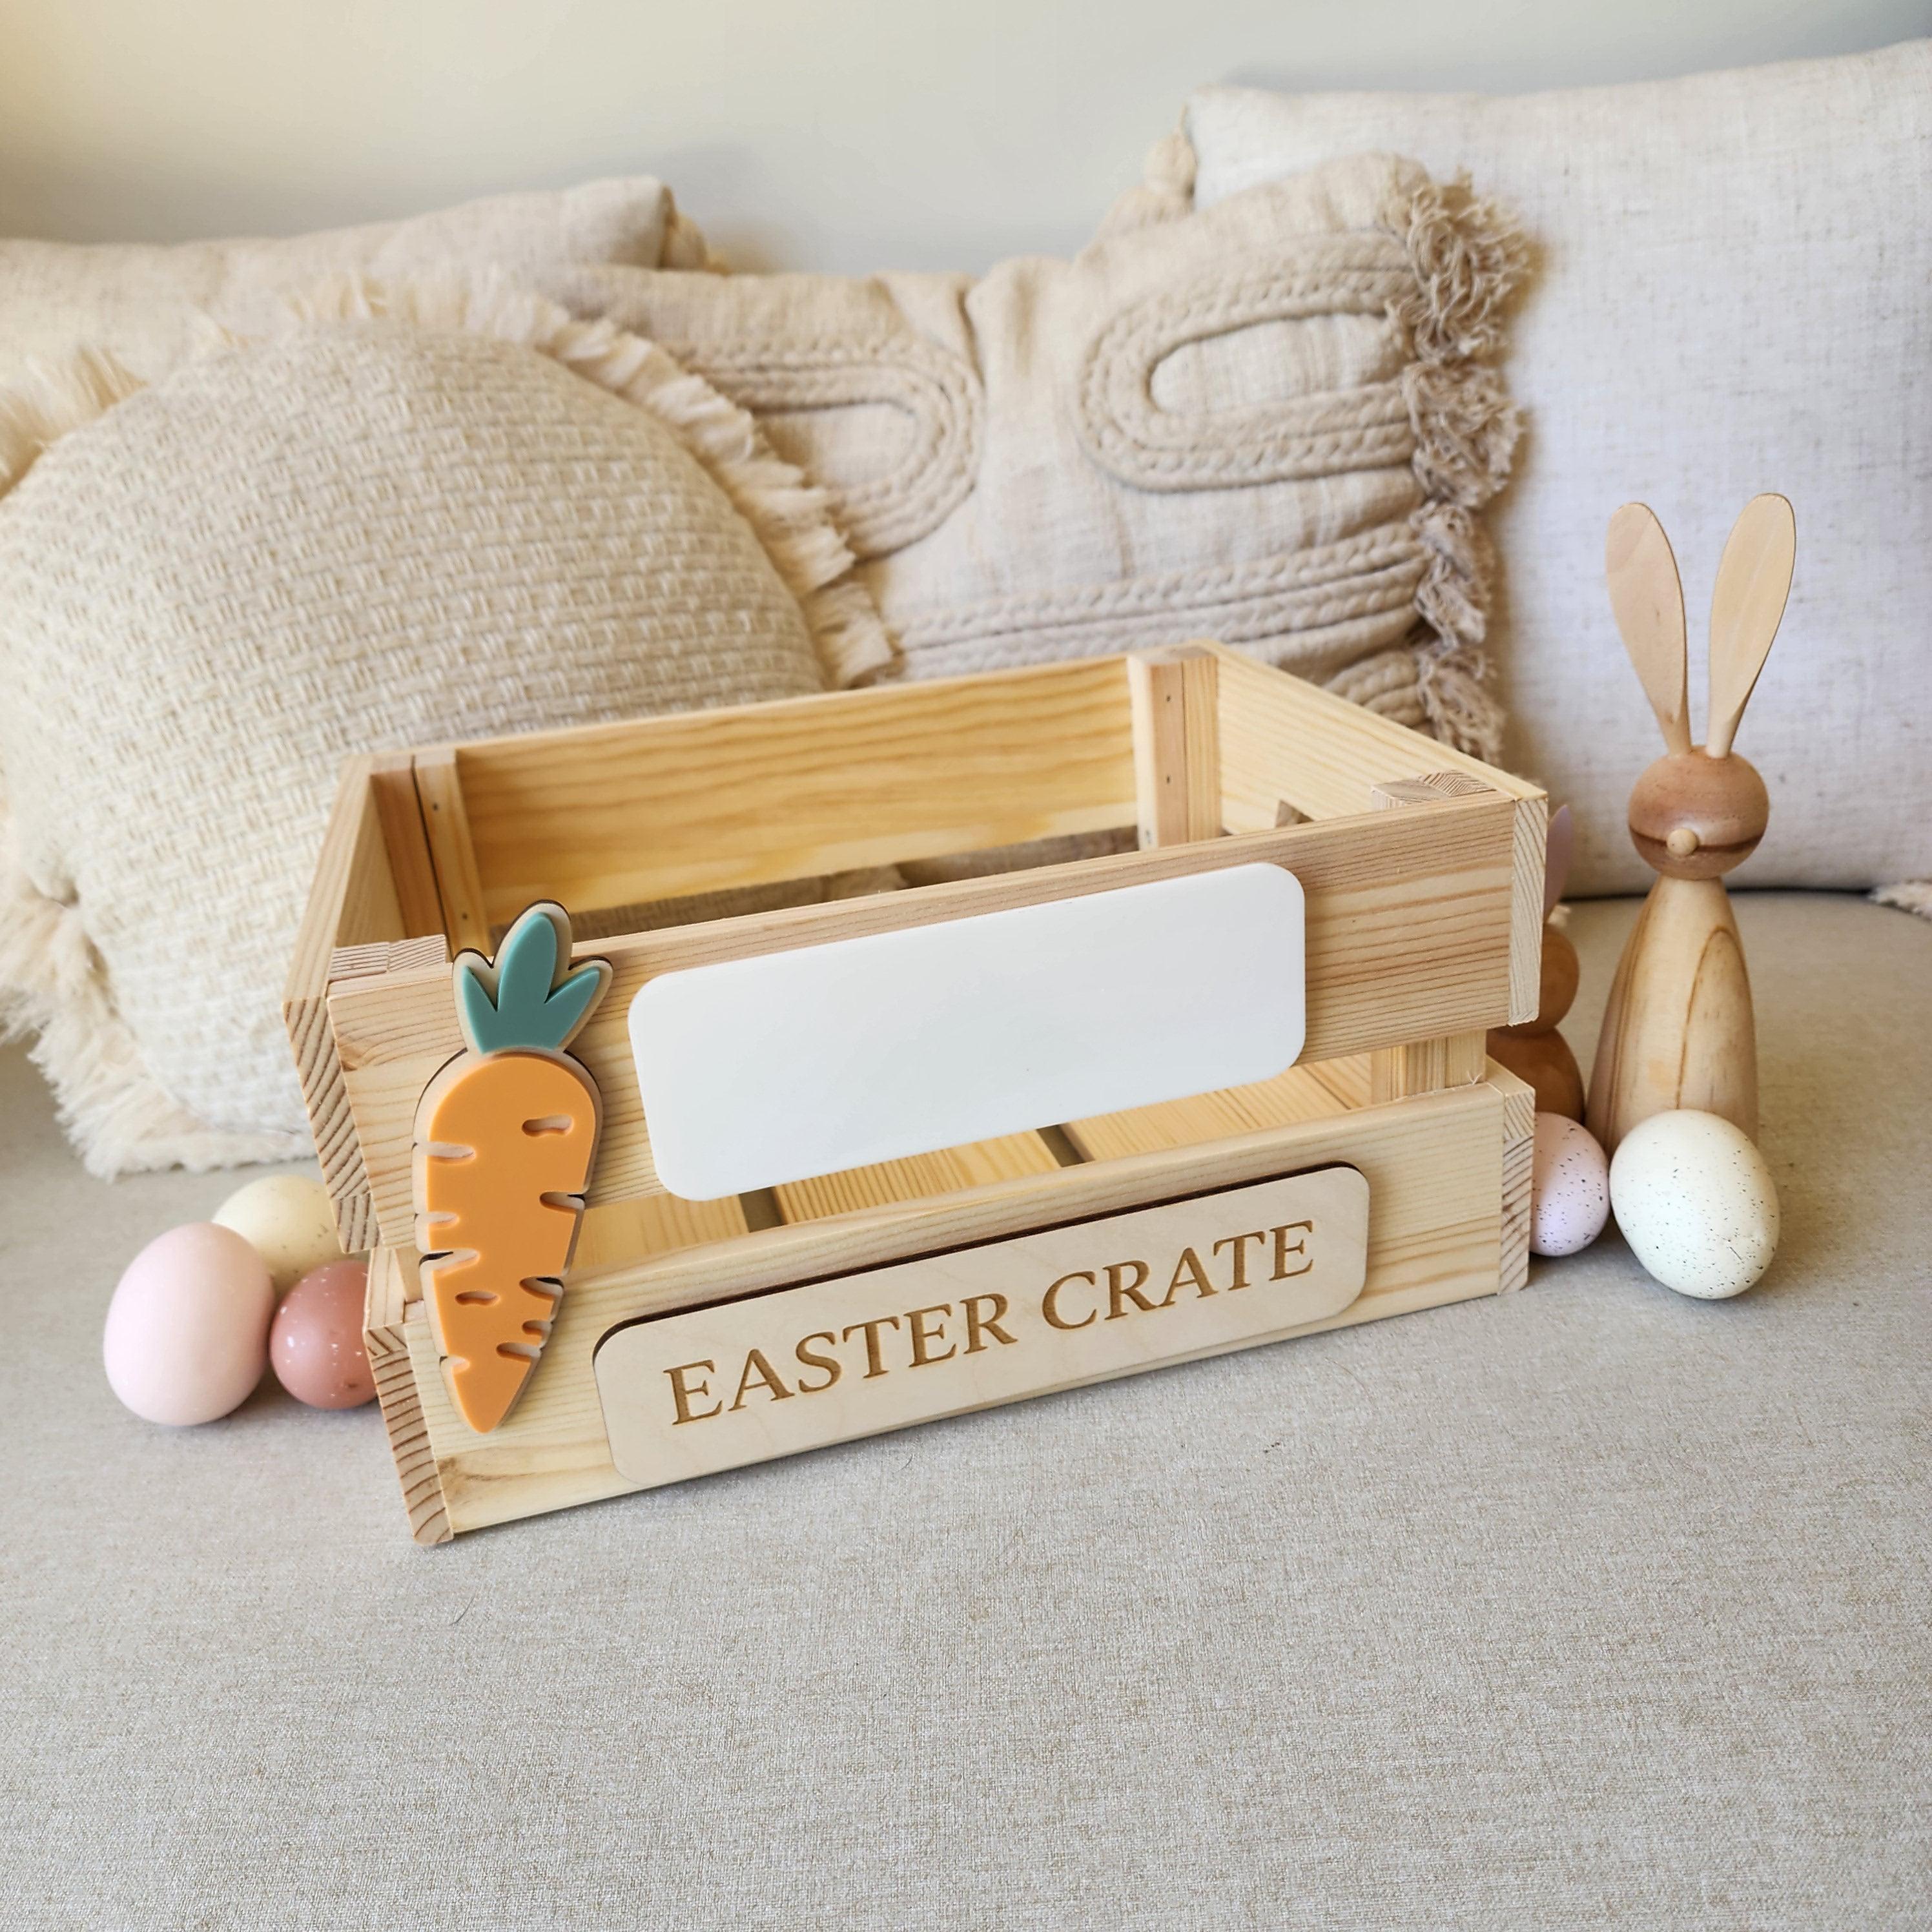 Blank Personalised Wooden Easter Crate with 3D Carrot Tag - Interchangeable Easter Day Keepsake Basket Box - The Willow Corner